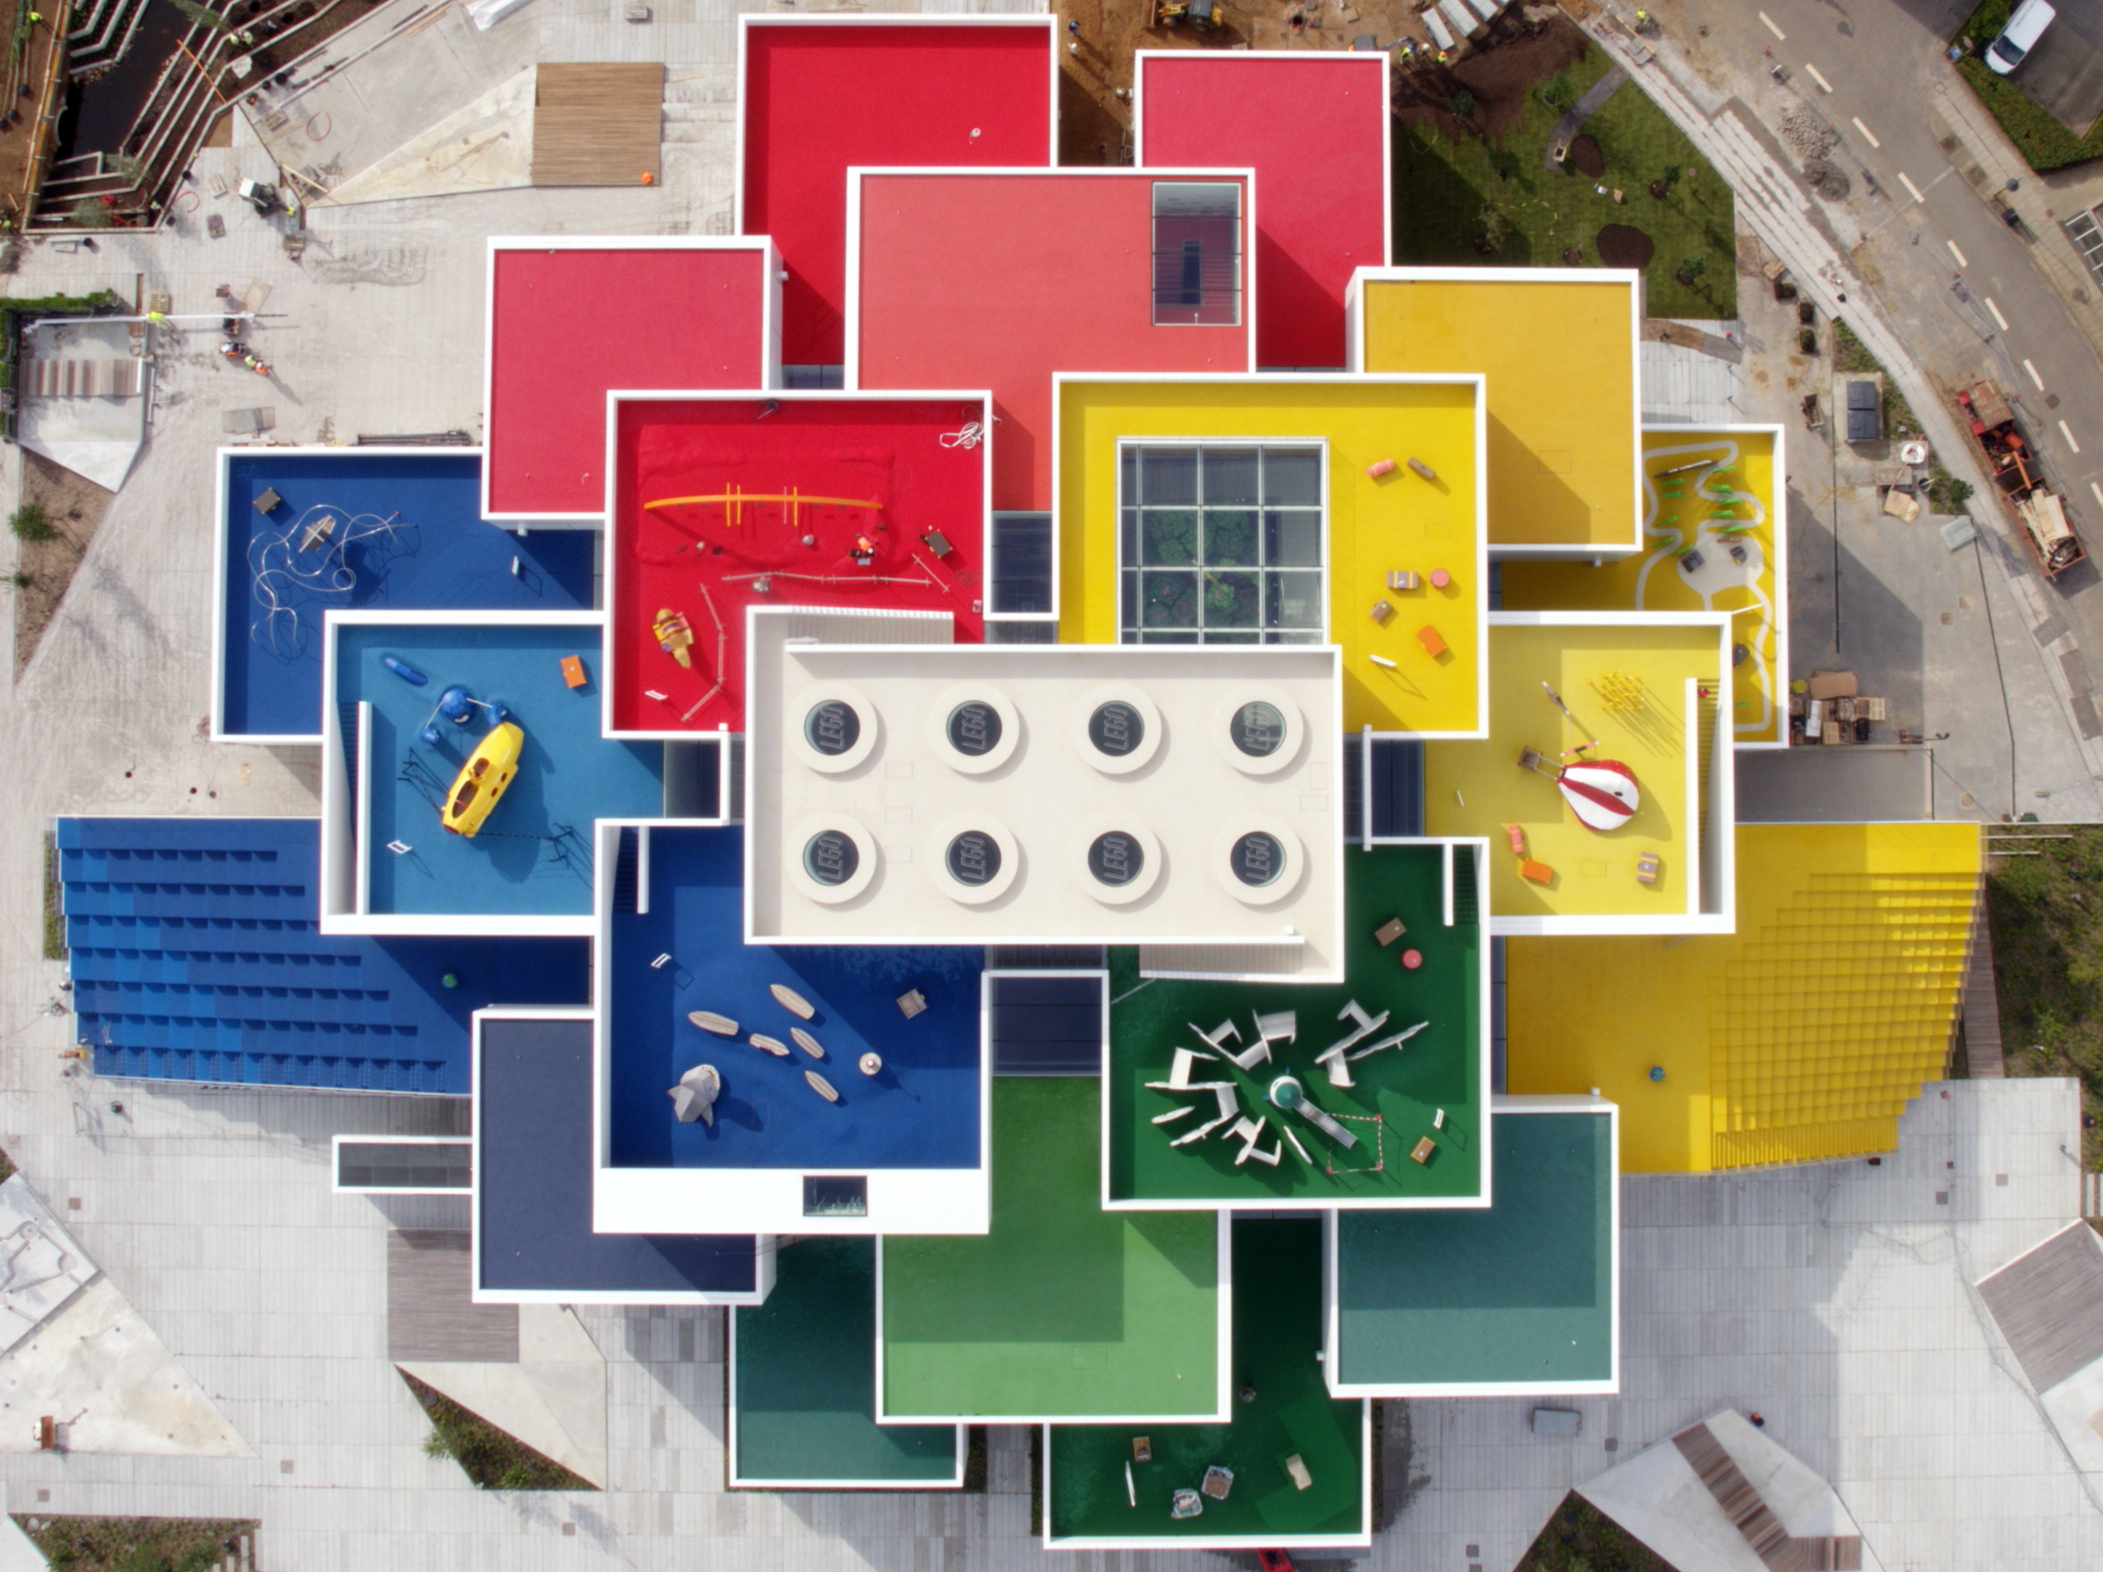 Architecture Building Cityscape City Aerial View LEGO Bricks Road Denmark Colorful Rooftops Google 2103x1572